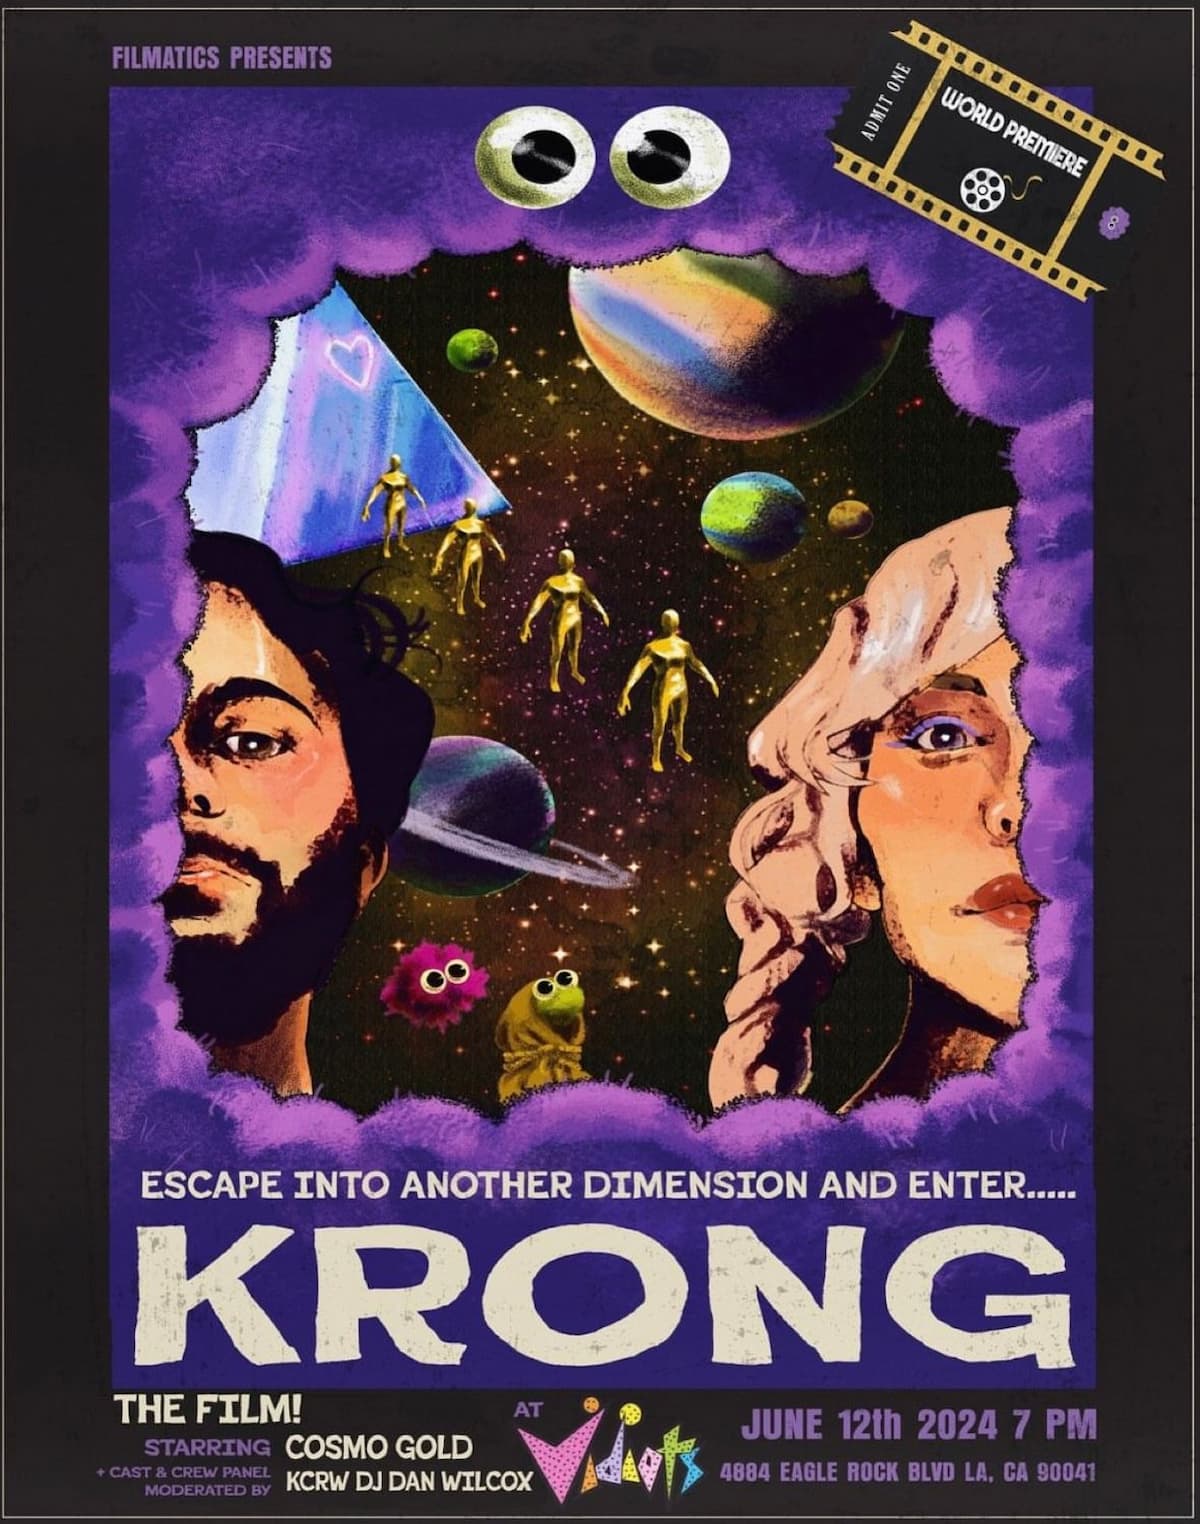 KRONG (the film) & Out of this World Showcase